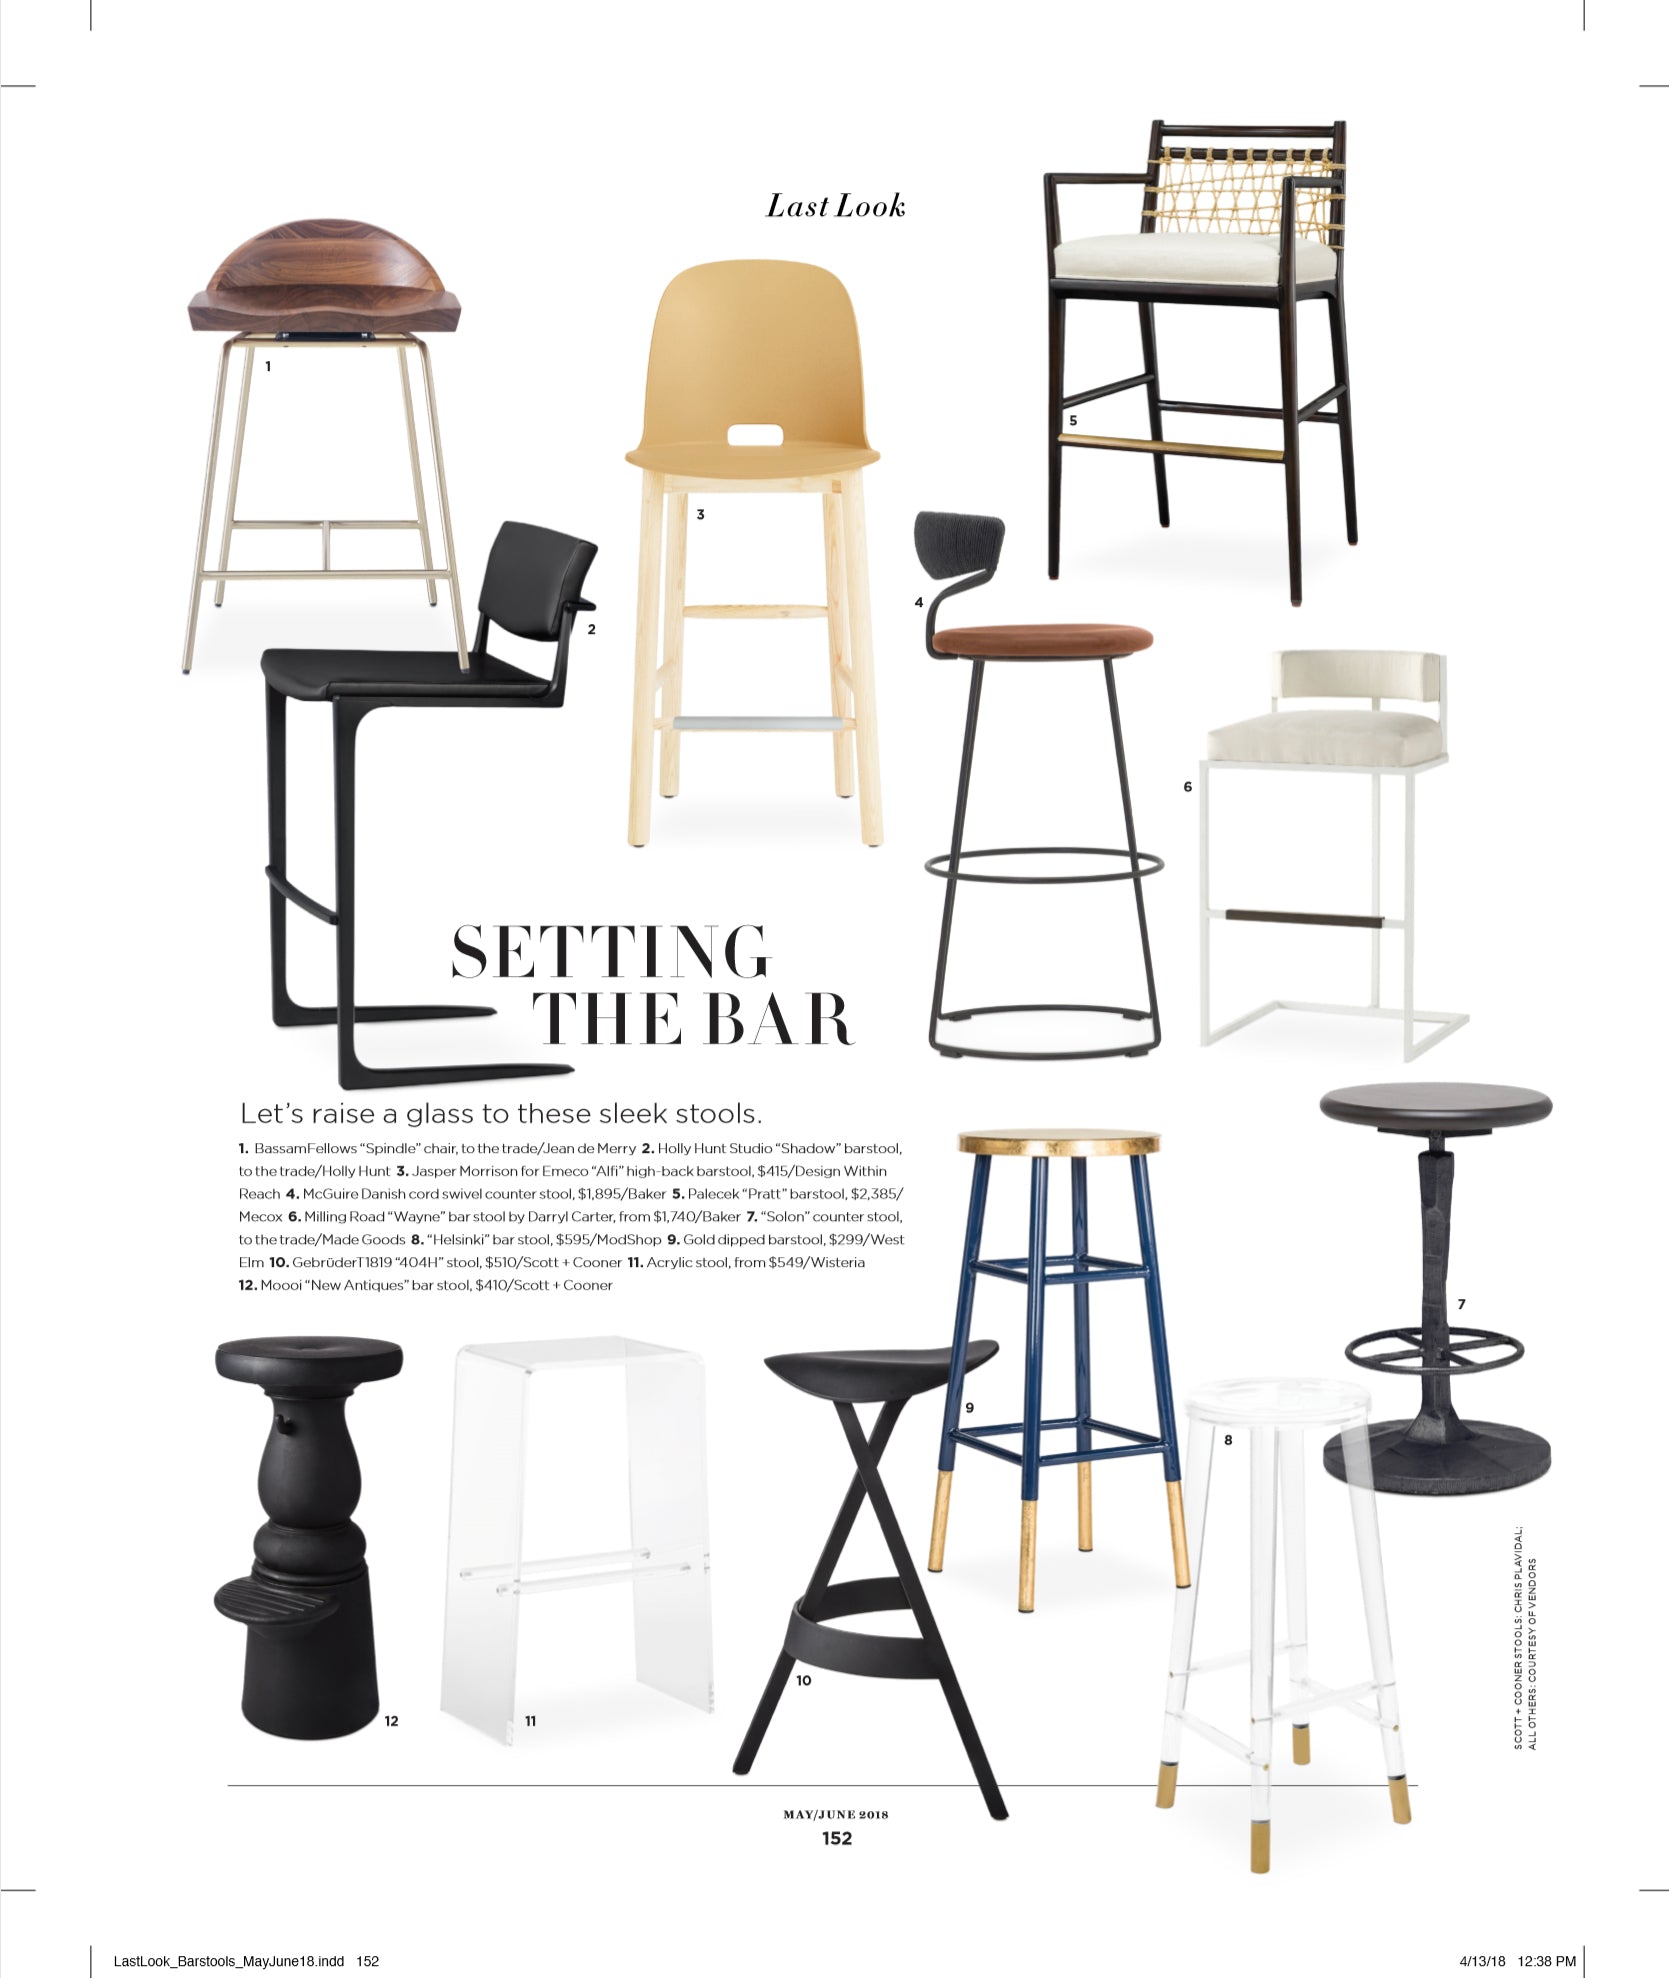 d home magazine may june 2018 article setting the bar featuring modshop's helsinki bar stool